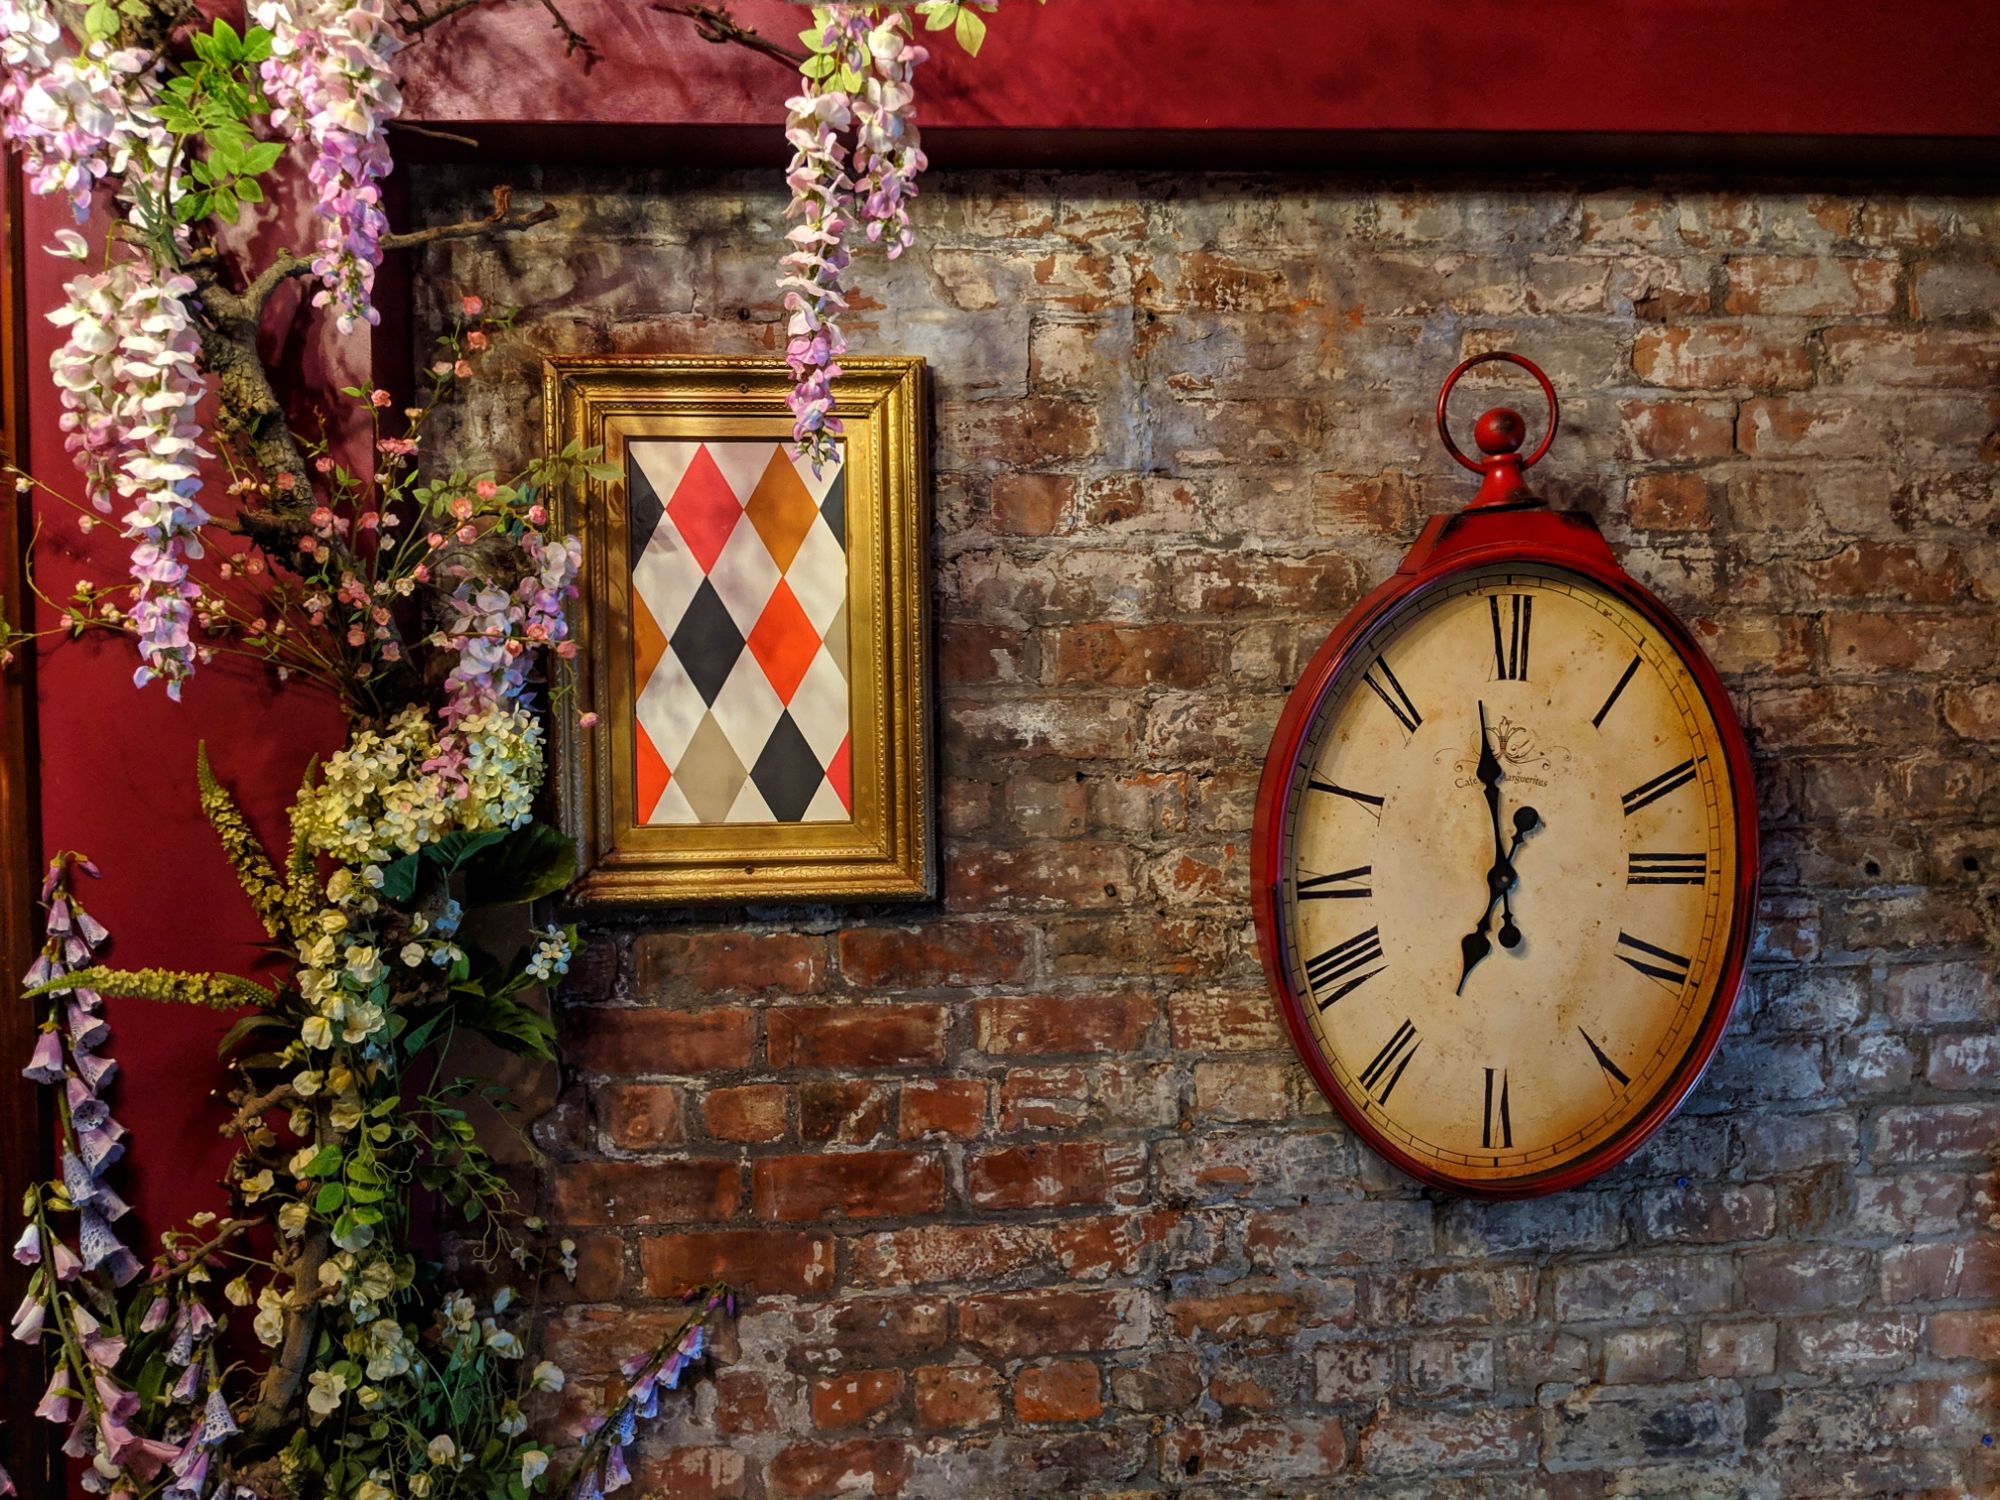 The entrance to the Richmond Tea Rooms Manchester. On the  brick wall  is a misshaped clock, a picture of harlequin pattern and some climbing plants.